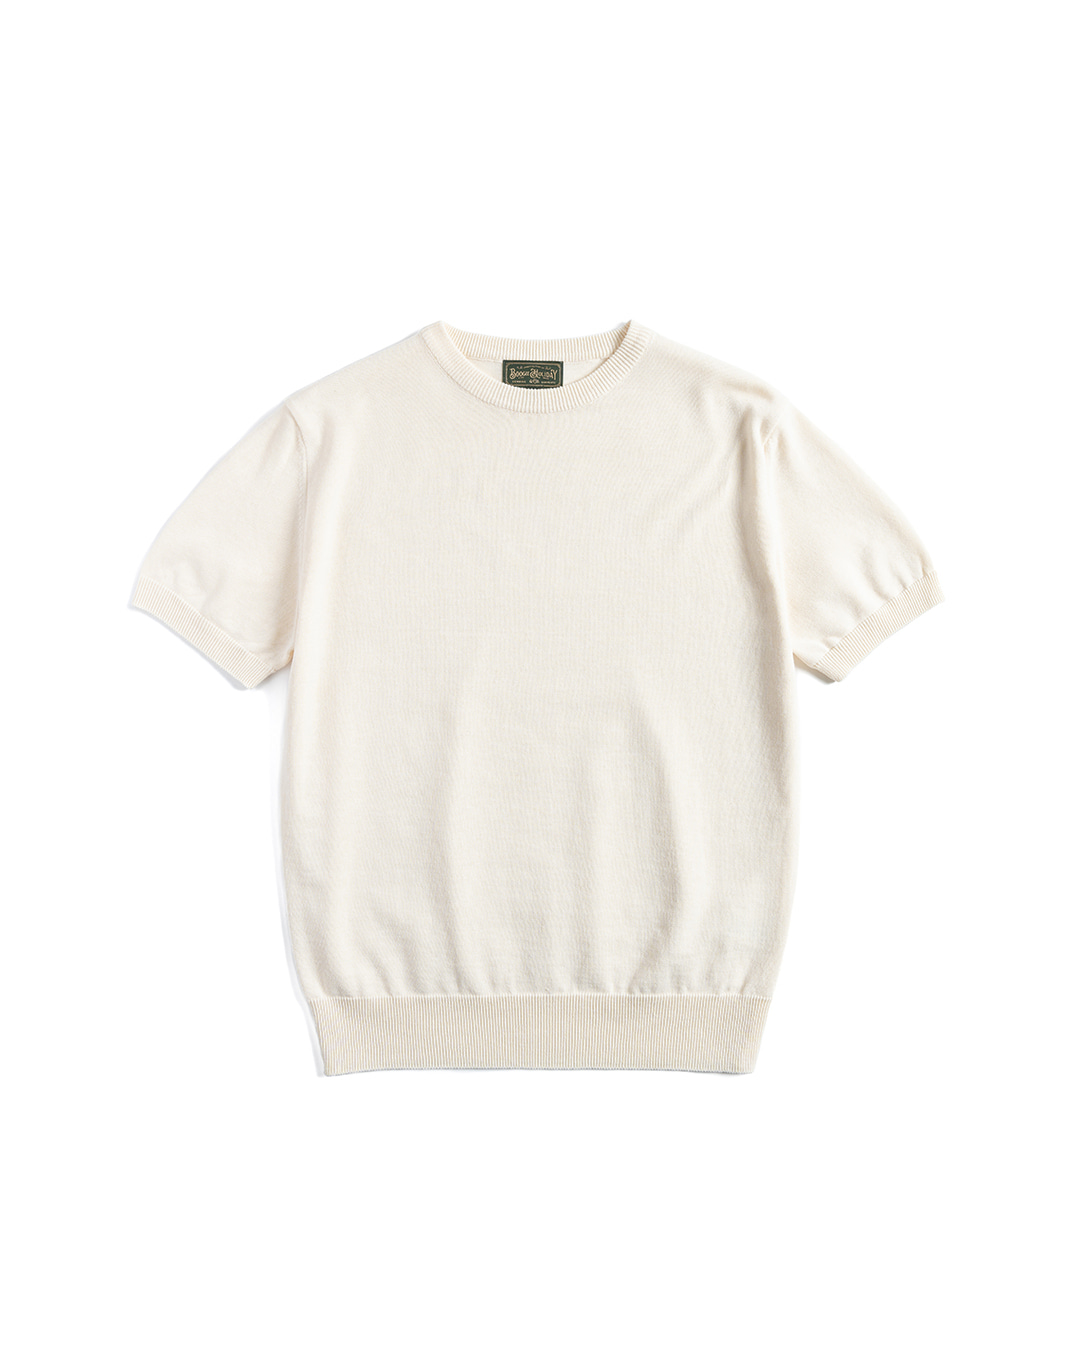 11 ESSENTIAL KNITTED T-SHIRT (cream)